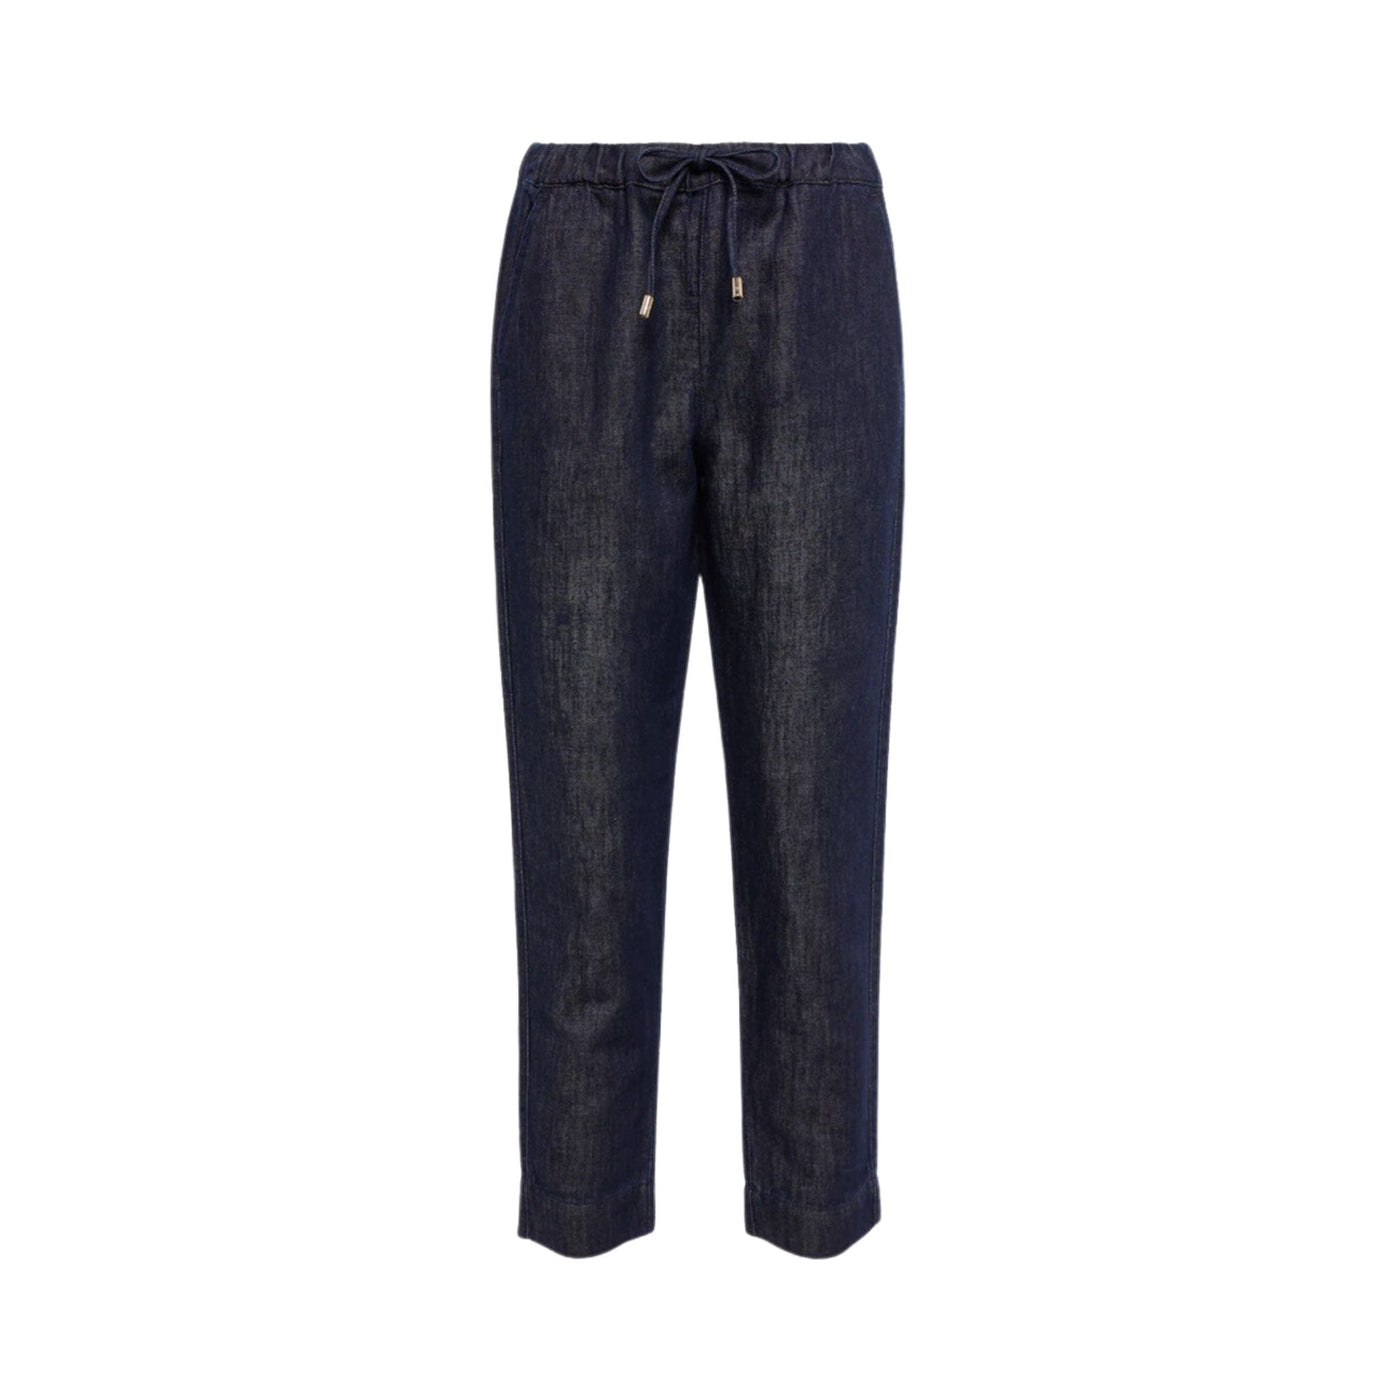 Pantalone Donna in denim con coulisse